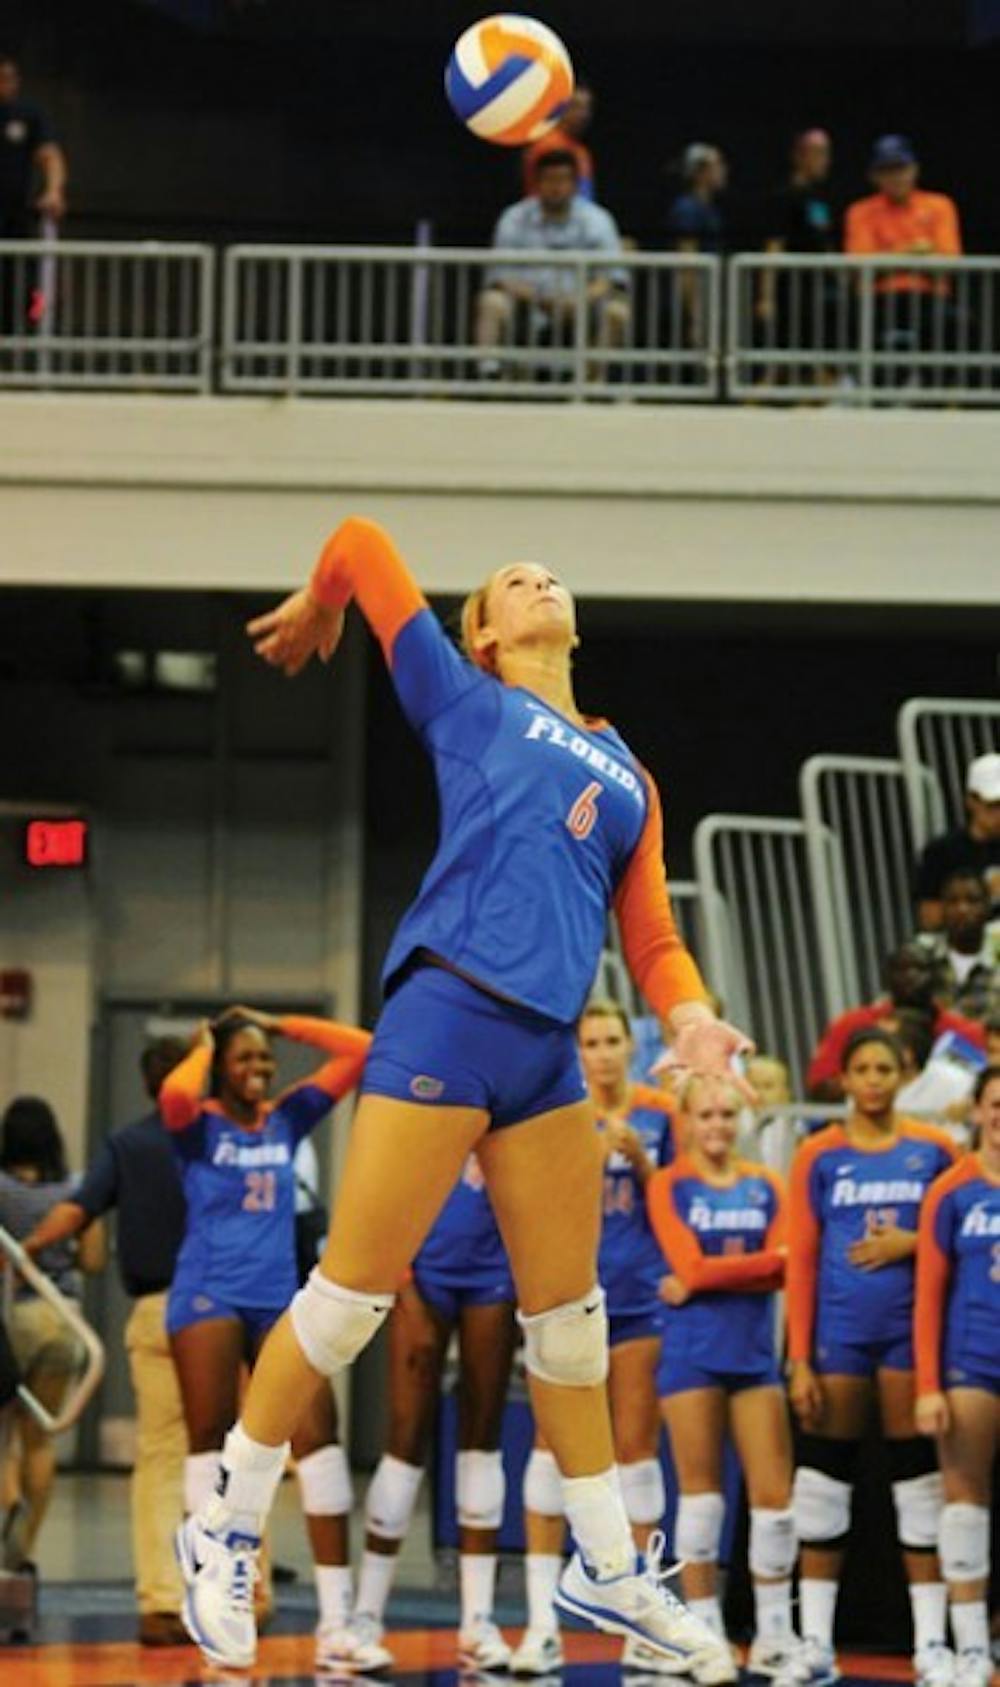 <p>Gators senior outside hitter Kristy Jaeckel said she tries to lead with her play, rather than her words.</p>